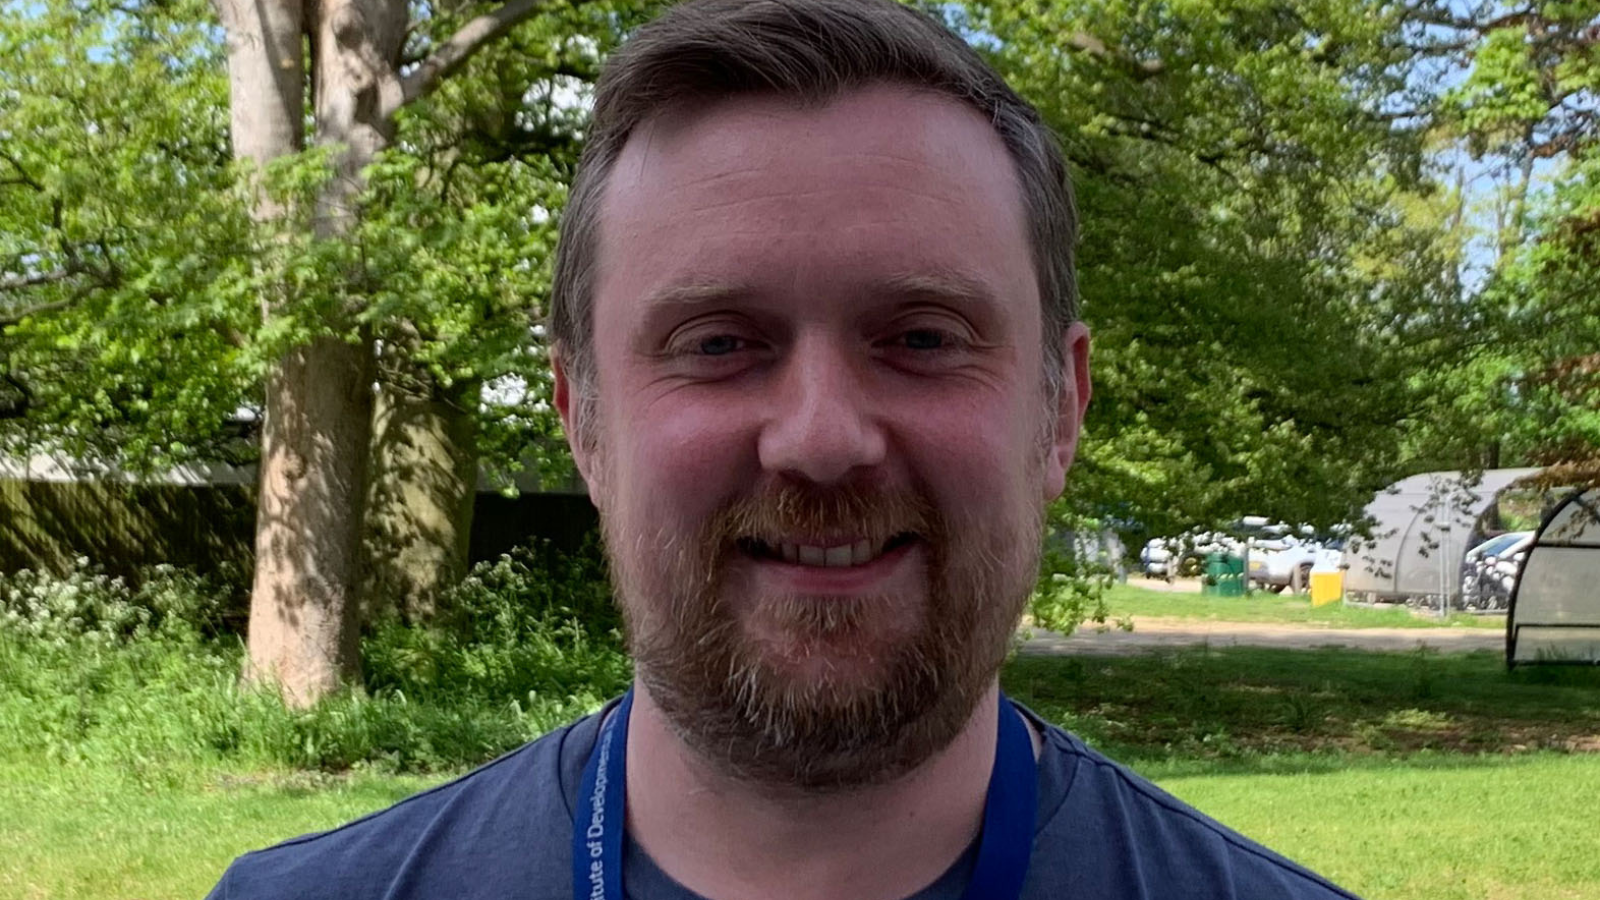 Headshot of Tom Roberts, the background appears to be a park with lots of grass and trees. You can also see the top of Tom's t-shirt which is navy in colour and his blue lanyard.